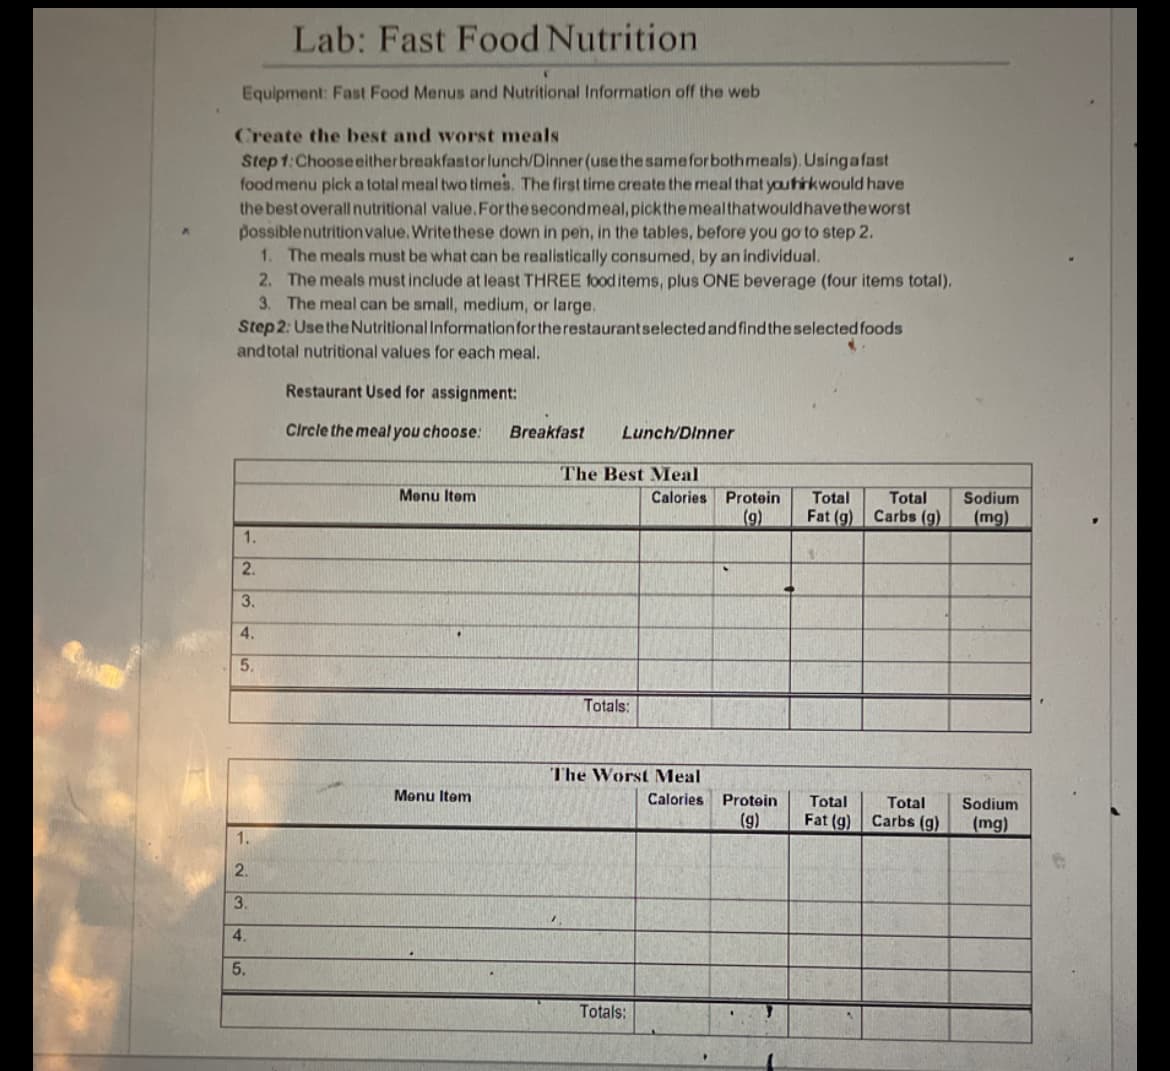 Lab: Fast Food Nutrition
Equipment: Fast Food Menus and Nutritional Information off the web
Create the best and worst meals
Step 1: Choose either breakfastor lunch/Dinner (use the same for both meals). Usingafast
food menu pick a total meal two times. The first time create the meal that you hirkwould have
the best overall nutritional value. For the second meal, pick the meal that would have the worst
possible nutrition value. Write these down in pen, in the tables, before you go to step 2.
Step 2: Use the Nutritional Information for the restaurant selected and find the selected foods
and total nutritional values for each meal.
Restaurant Used for assignment:
Circle the meal you choose:
1. The meals must be what can be realistically consumed, by an individual.
2. The meals must include at least THREE food items, plus ONE beverage (four items total),
3. The meal can be small, medium, or large.
1.
2.
3.
4.
5.
1.
2.
3.
4.
5.
Menu Item
Menu Item
Breakfast
Lunch/Dinner
The Best Meal
Calories
Totals:
The Worst Meal
Totals:
Protein
(9)
Calories Protein
(9)
Total Total Sodium
Fat (g) Carbs (g) (mg)
1
Total
Total
Fat (g) Carbs (g)
Sodium
(mg)